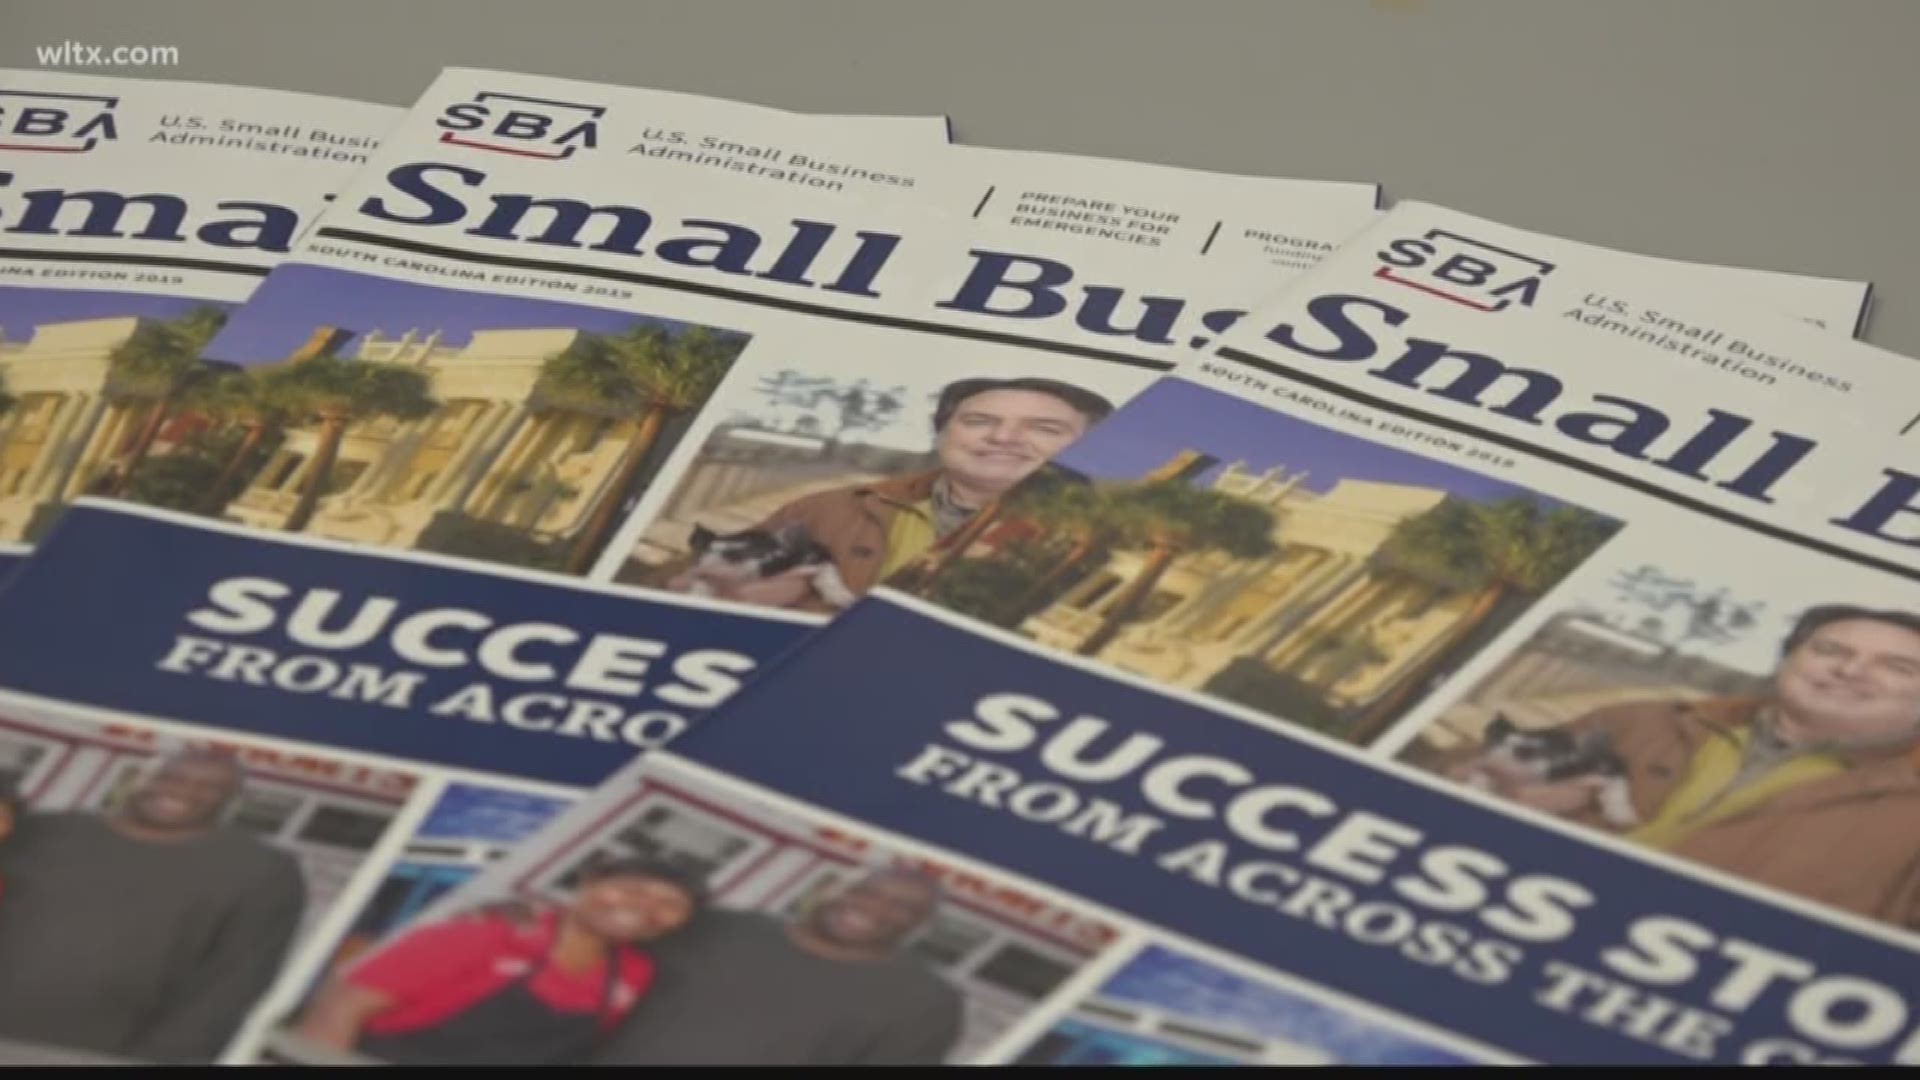 SC State University hosts a certification program for women business owners.